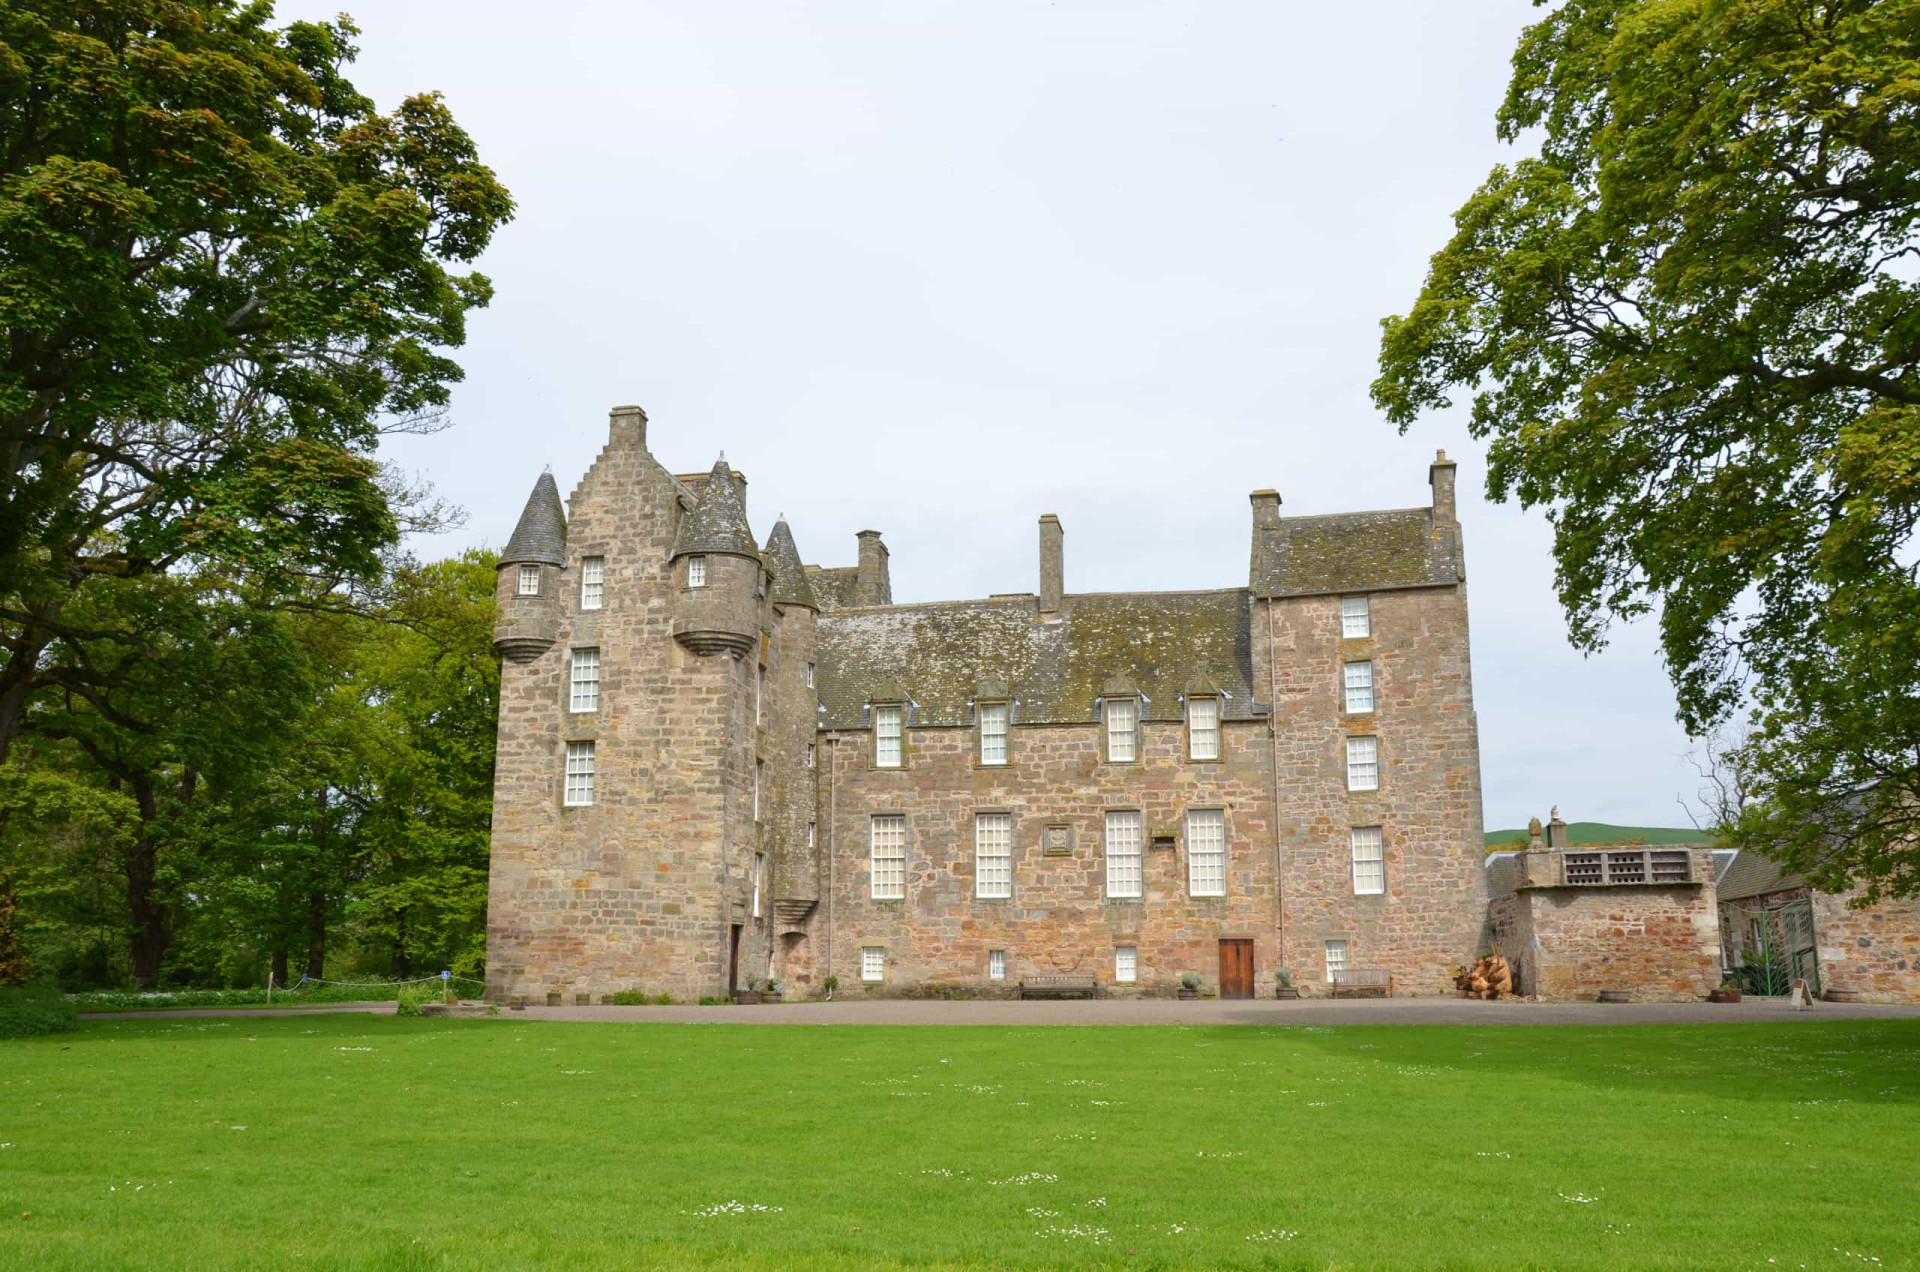 <p>This picturesque 14th-century castle in Fife has a dark past: a resident named Anne Erskine died when she fell from an upstairs window. She apparently has unfinished business with her family home. </p><p><a href="https://www.msn.com/en-ca/community/channel/vid-7xx8mnucu55yw63we9va2gwr7uihbxwc68fxqp25x6tg4ftibpra?cvid=94631541bc0f4f89bfd59158d696ad7e">Follow us and access great exclusive content every day</a></p>